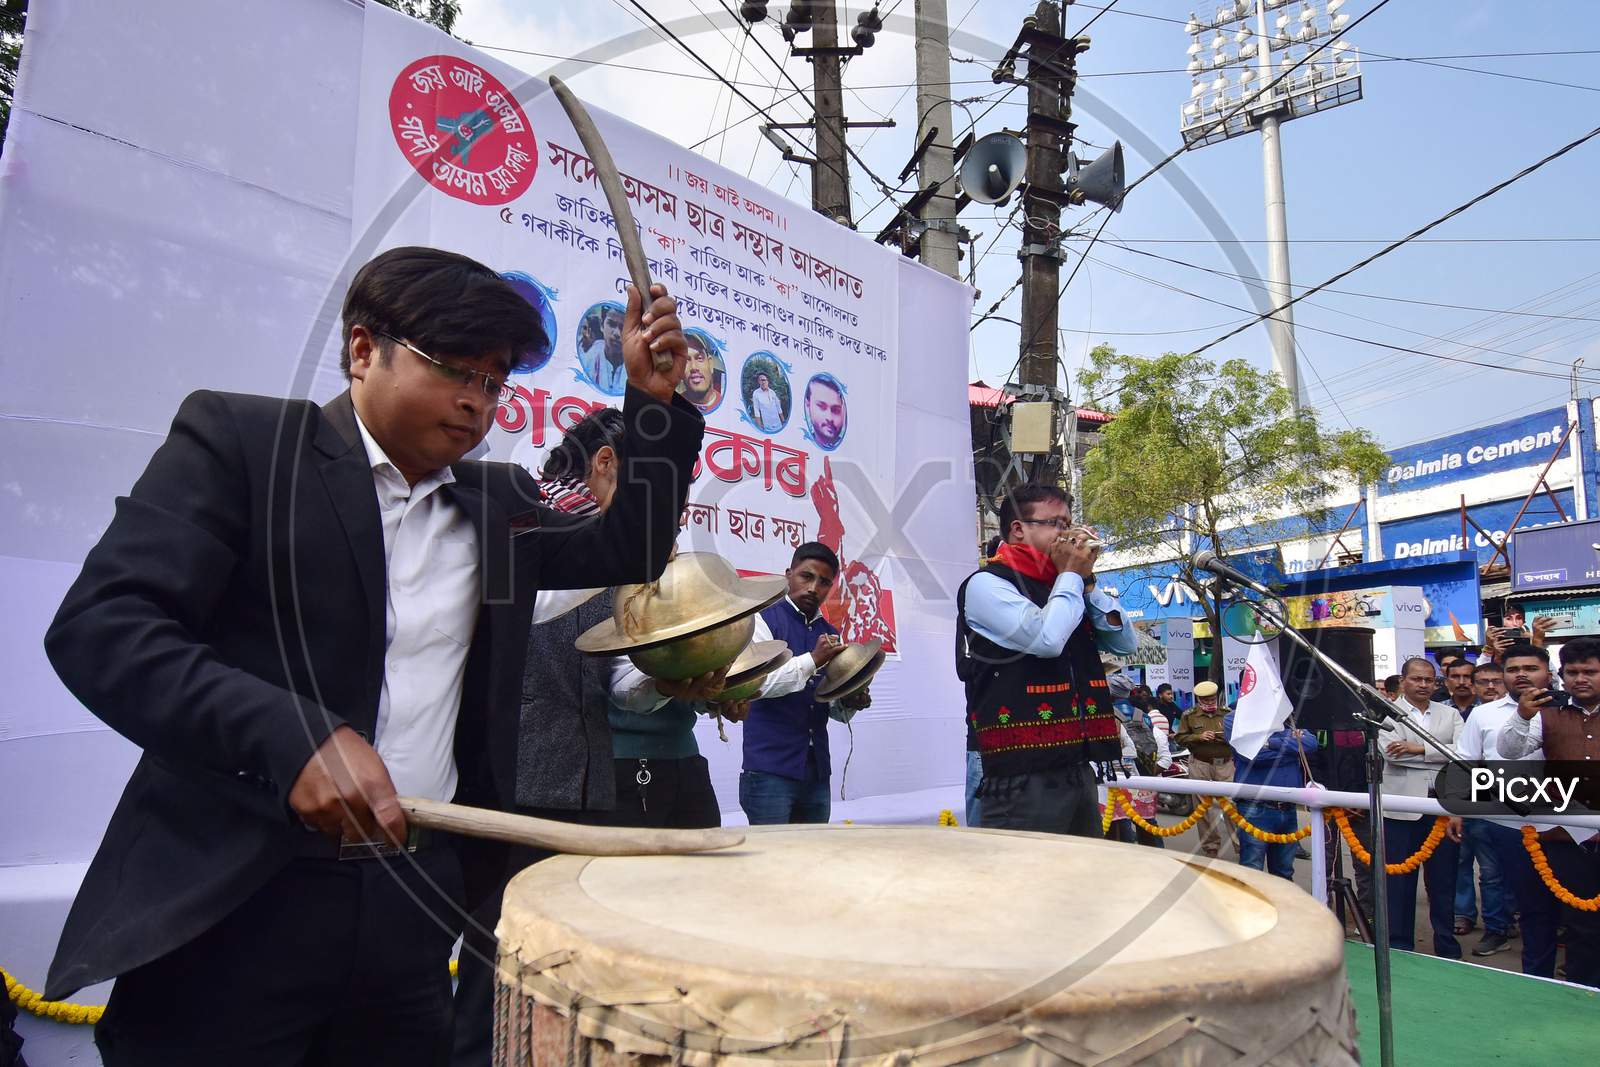 Activist of All Assam Students union (AASU) plays a drum and other instruments during a protest against the Citizenship Amendment Act (CAA), in Nagaon District of Assam, India on Dec 12,2020